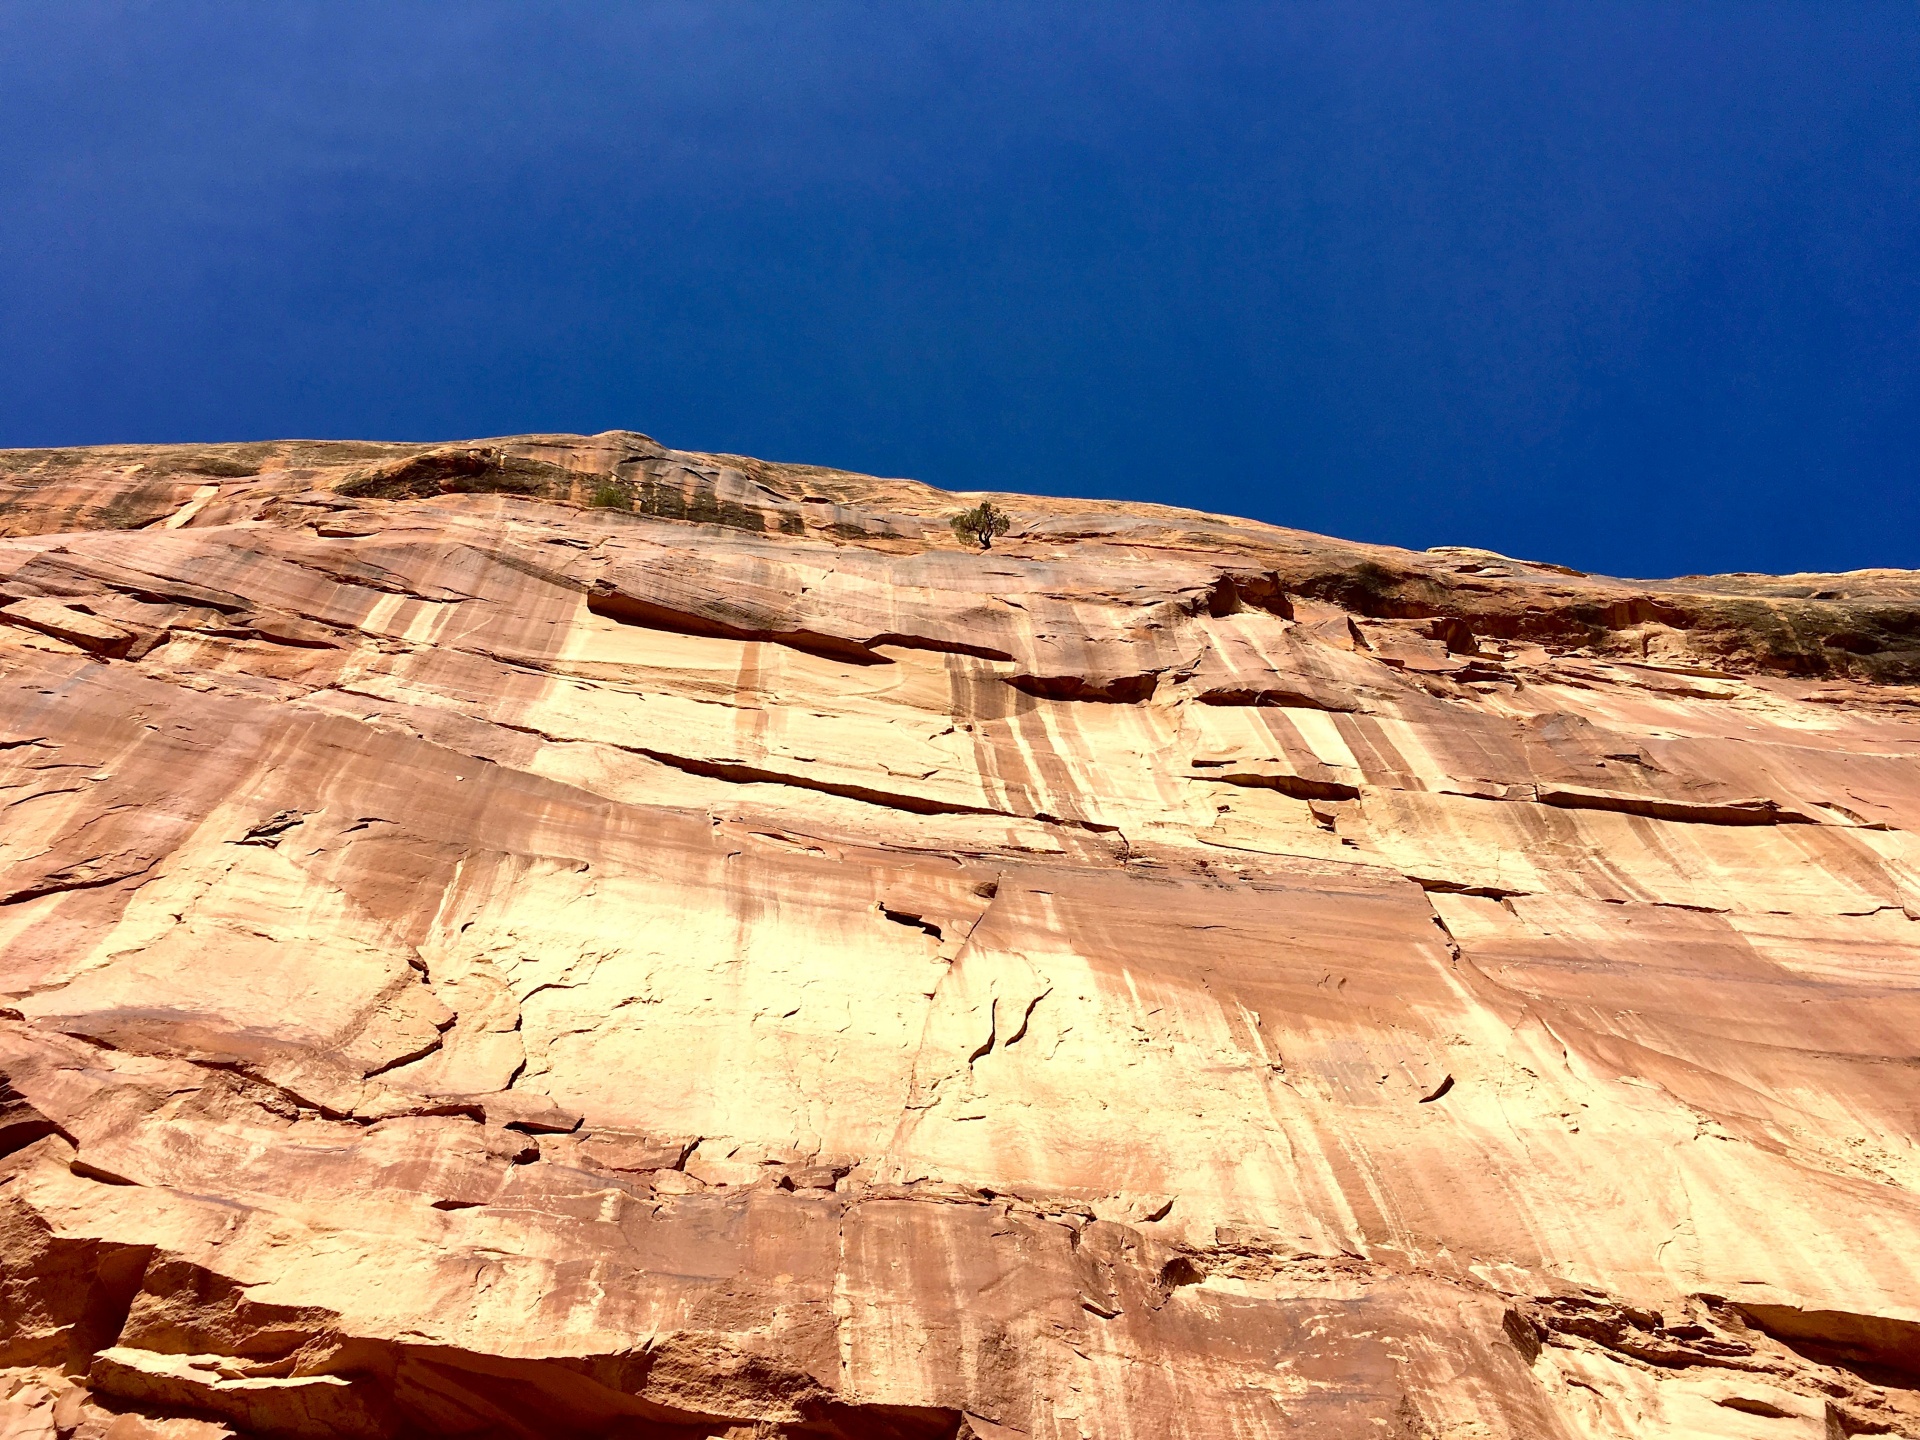 A tall cliff, seen from the ground looking up, in Western Colorado. Found along the Independence Monument trail in the Colorado National Monument.